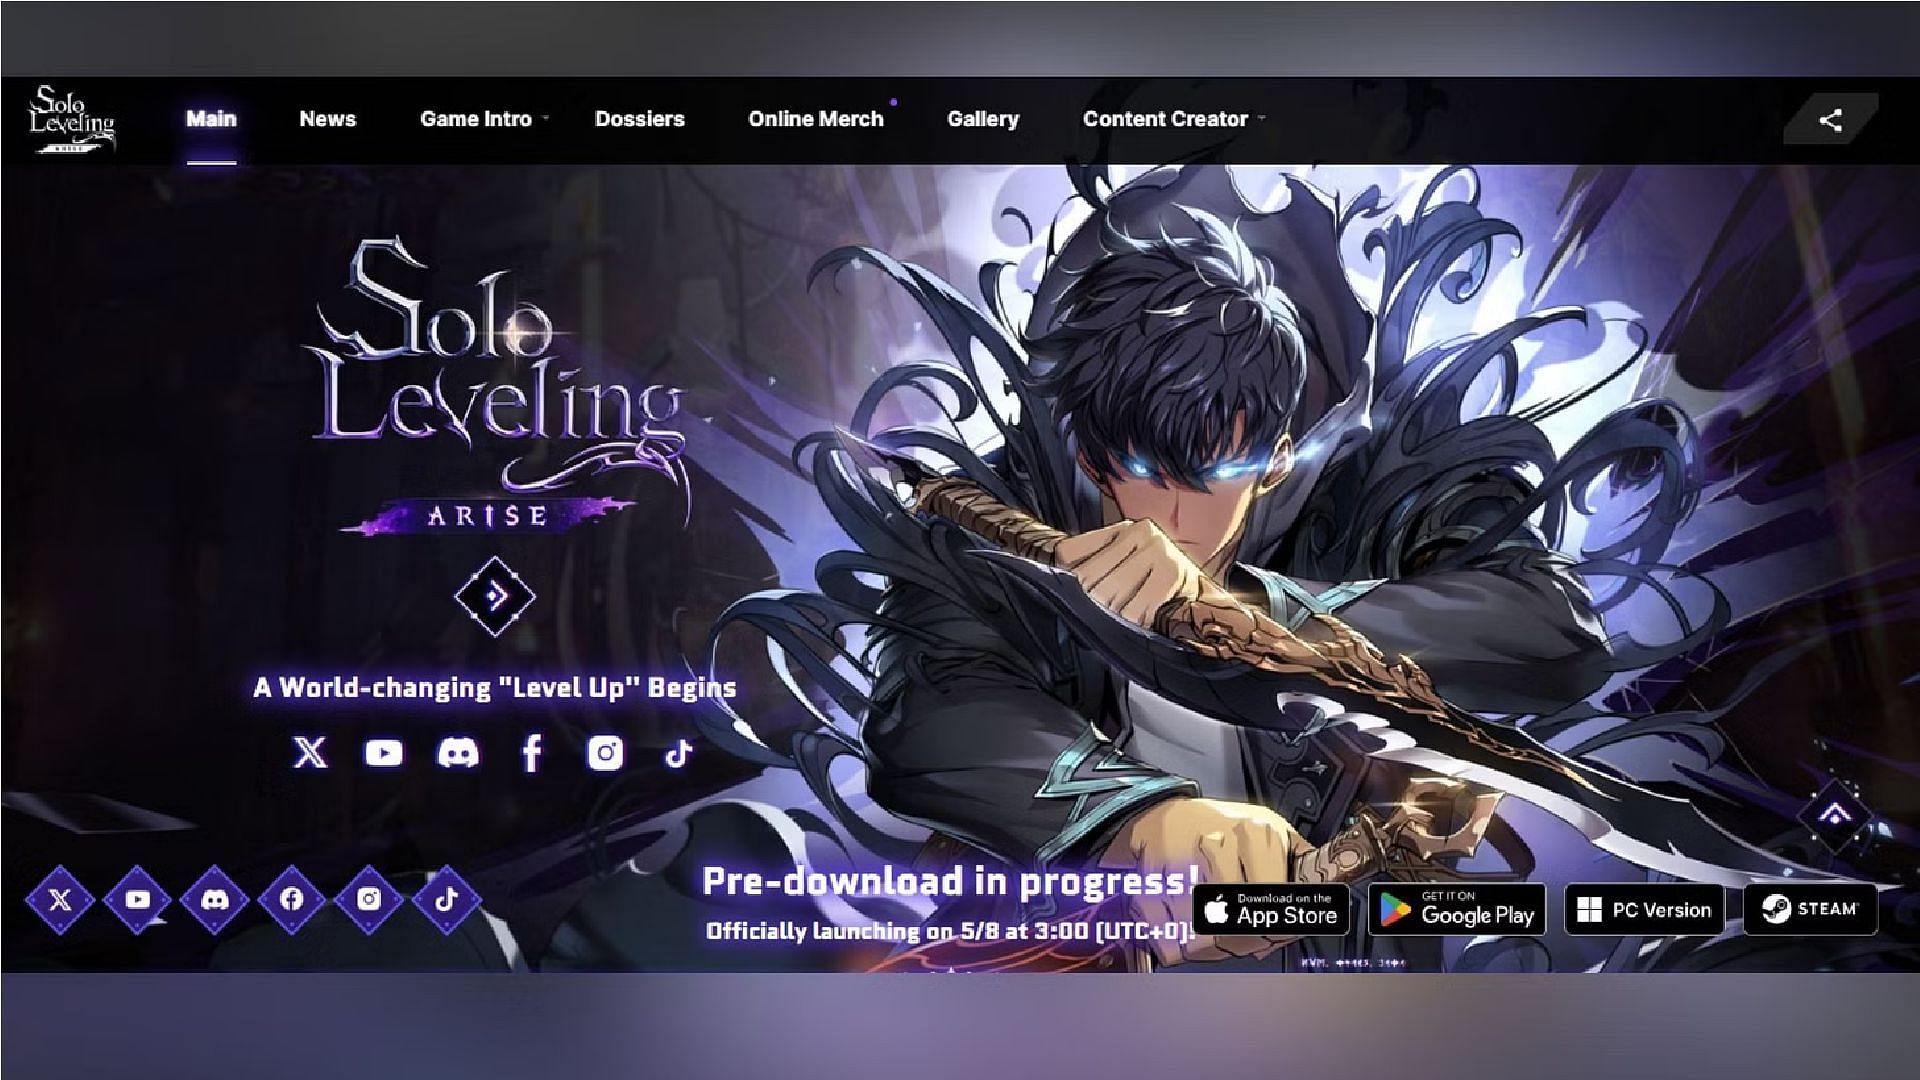 Solo Leveling Arise is now available for PC users on the official website (Image via Netmarble)